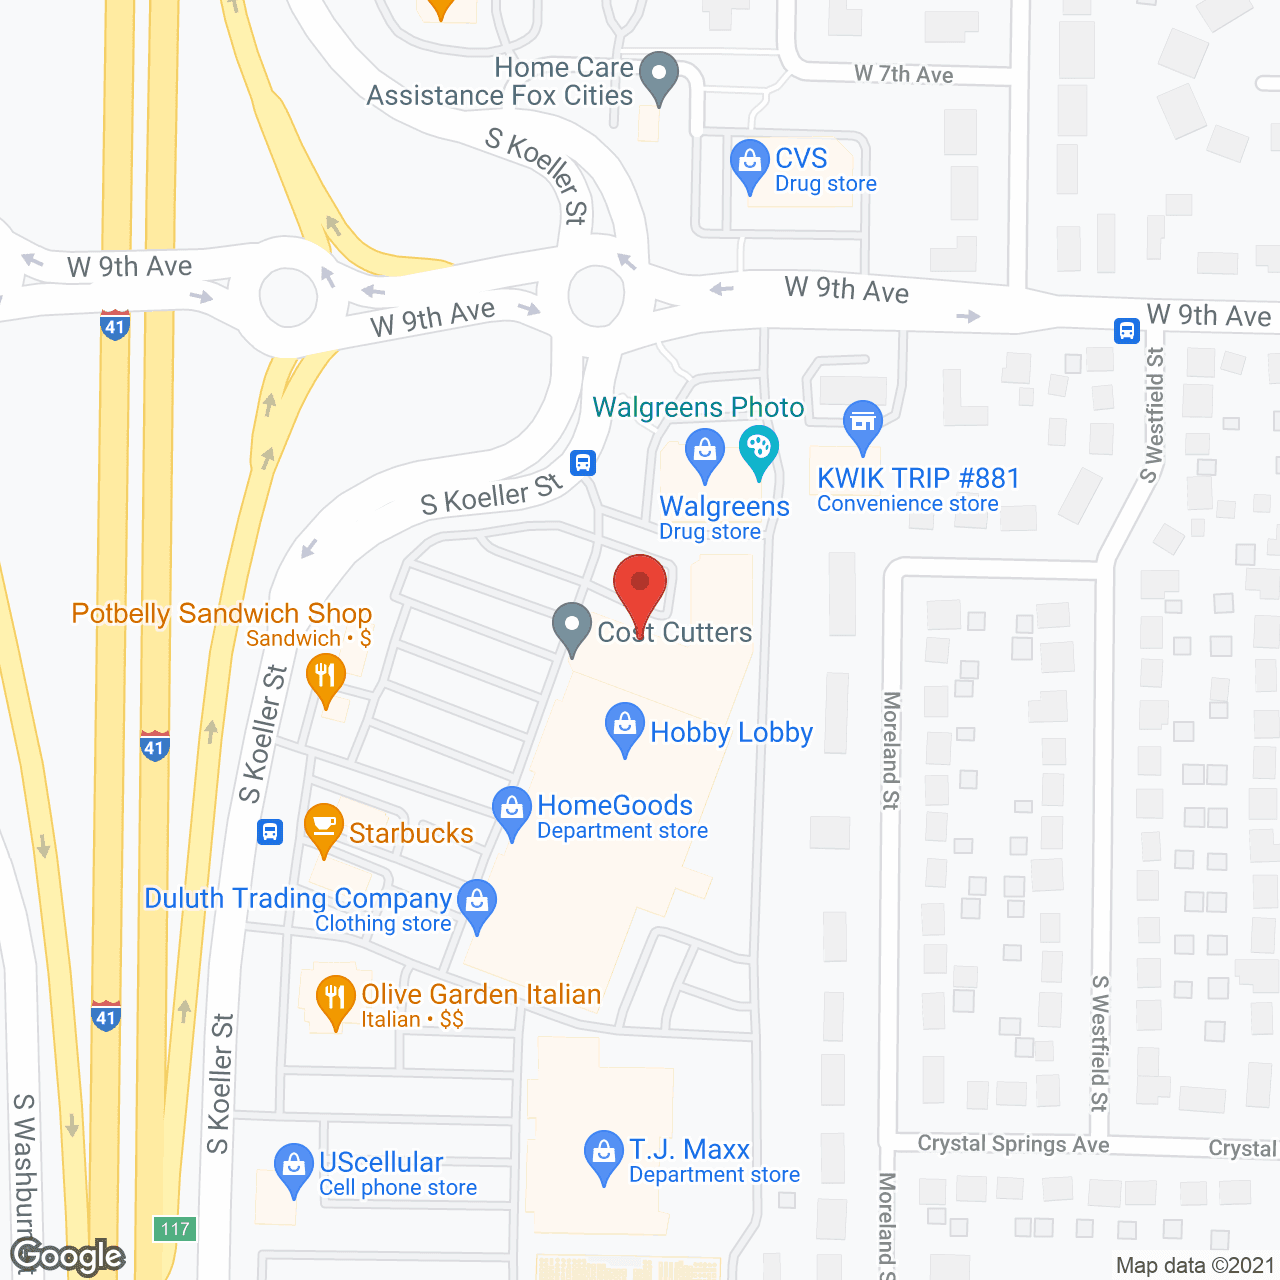 Home Care Assistance Fox Cities in google map